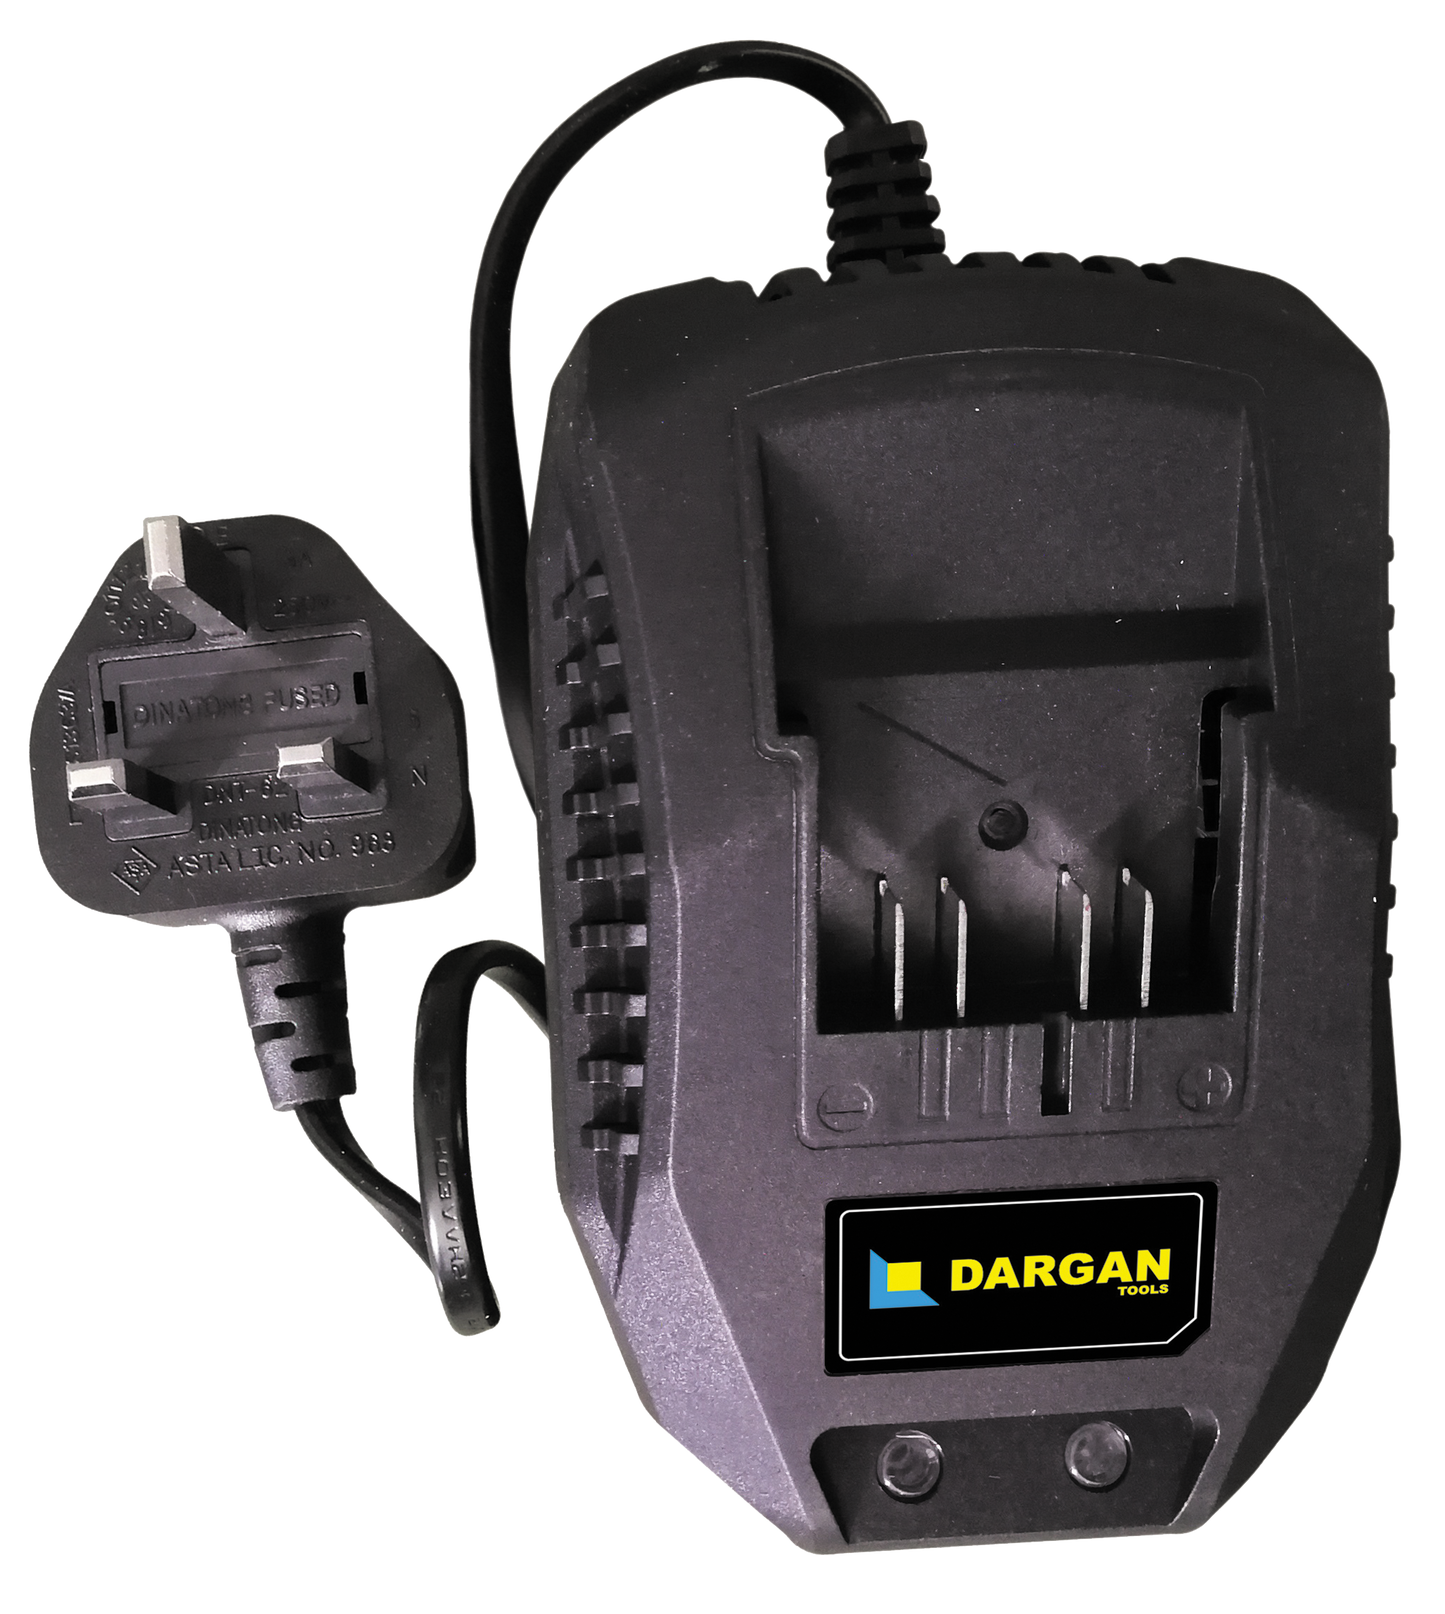 Dargan BS Plug Fast Battery Charger 2.4A